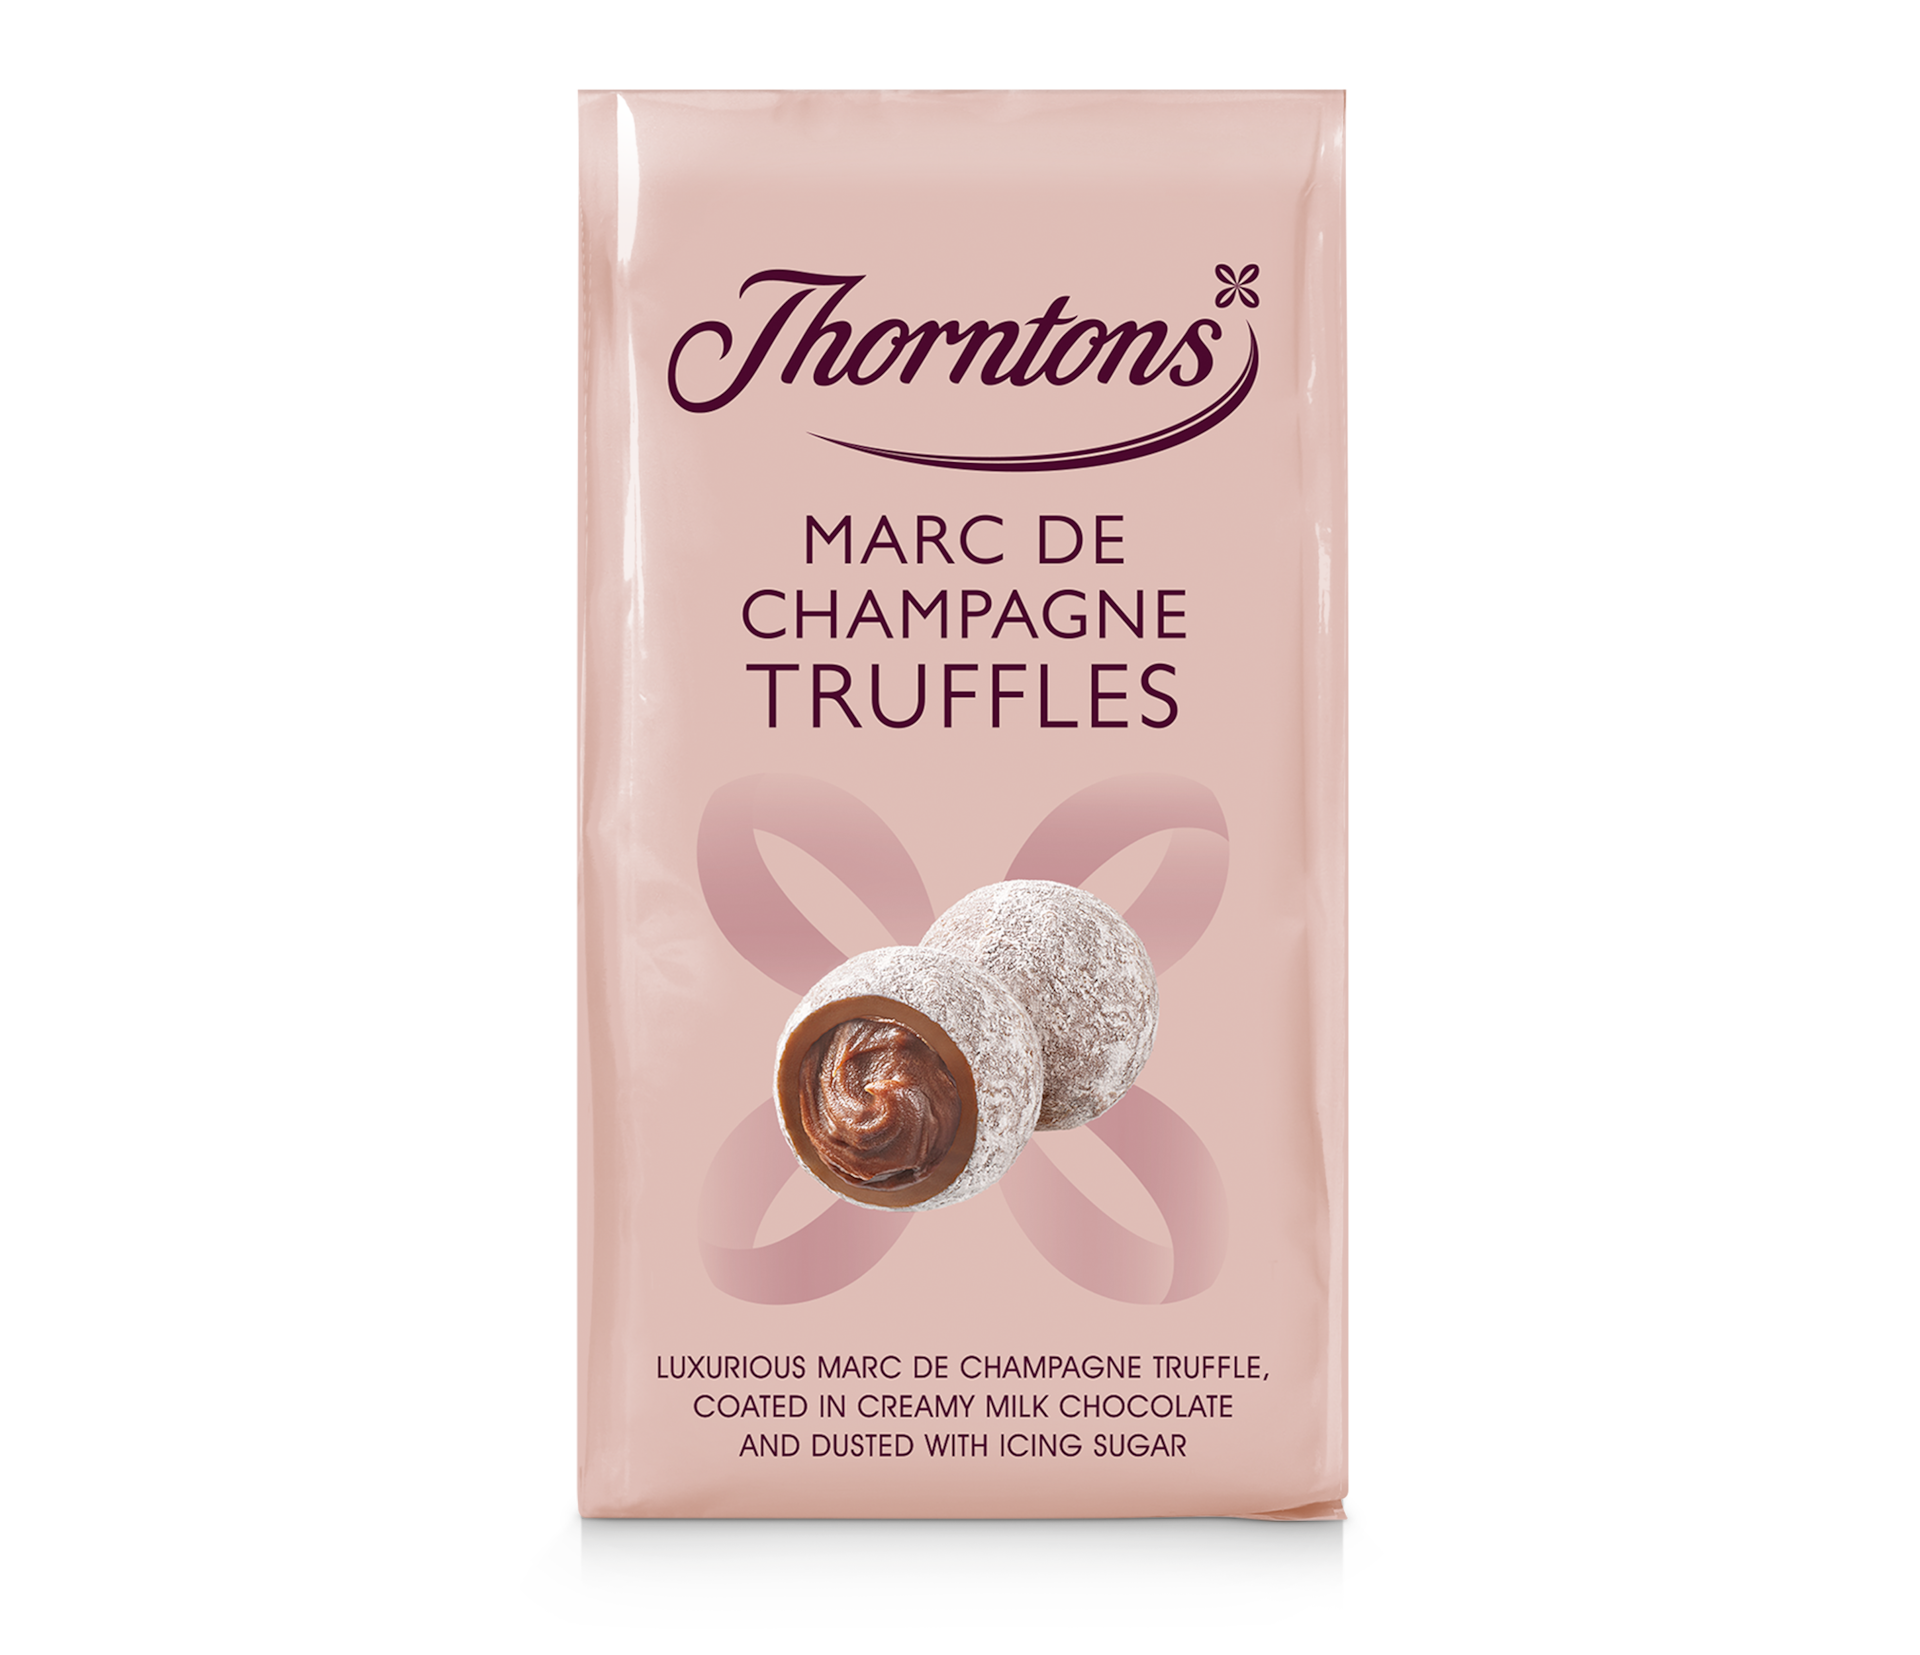 https://www.thorntons.com/medias/sys_master/images/h86/h6a/8916764524574/77210009_main/77210009-main.png?resize=xs-s-xs